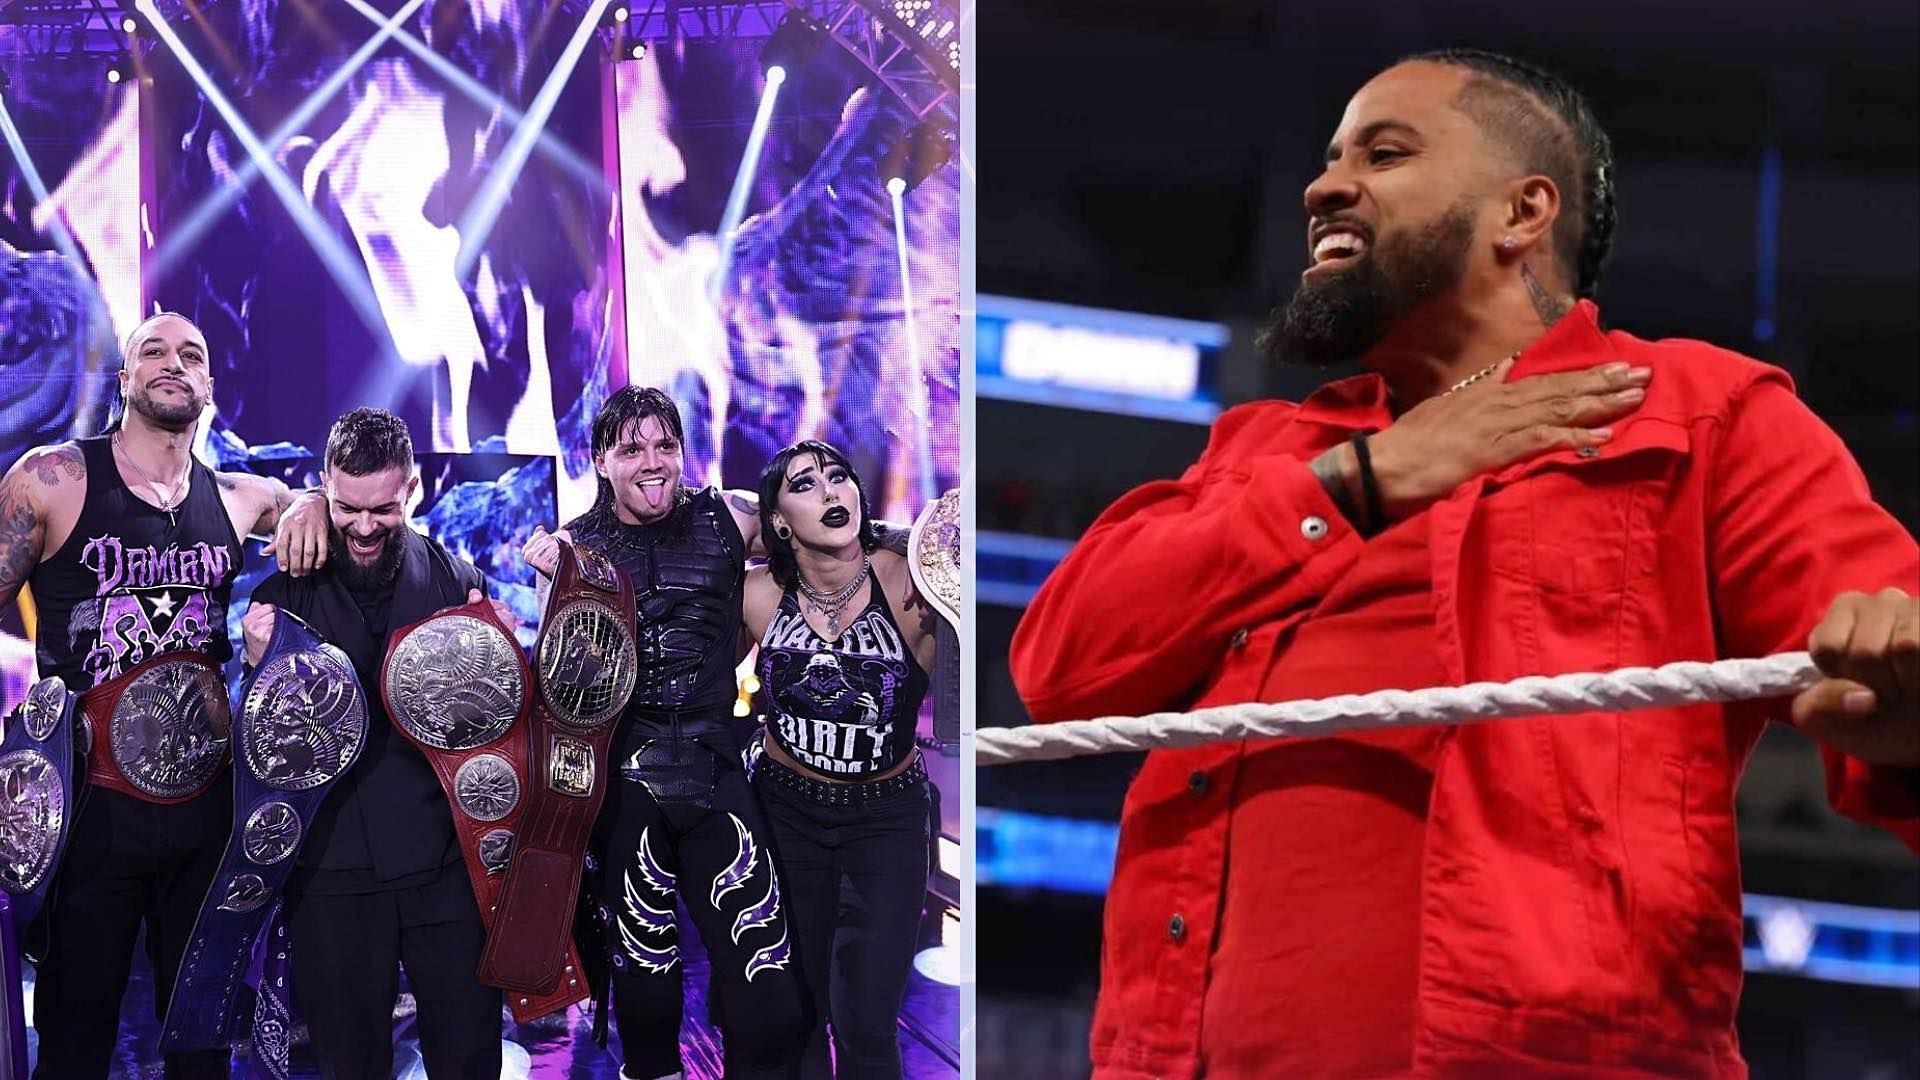 The Judgment Day could expand with new WWE stars in 2024